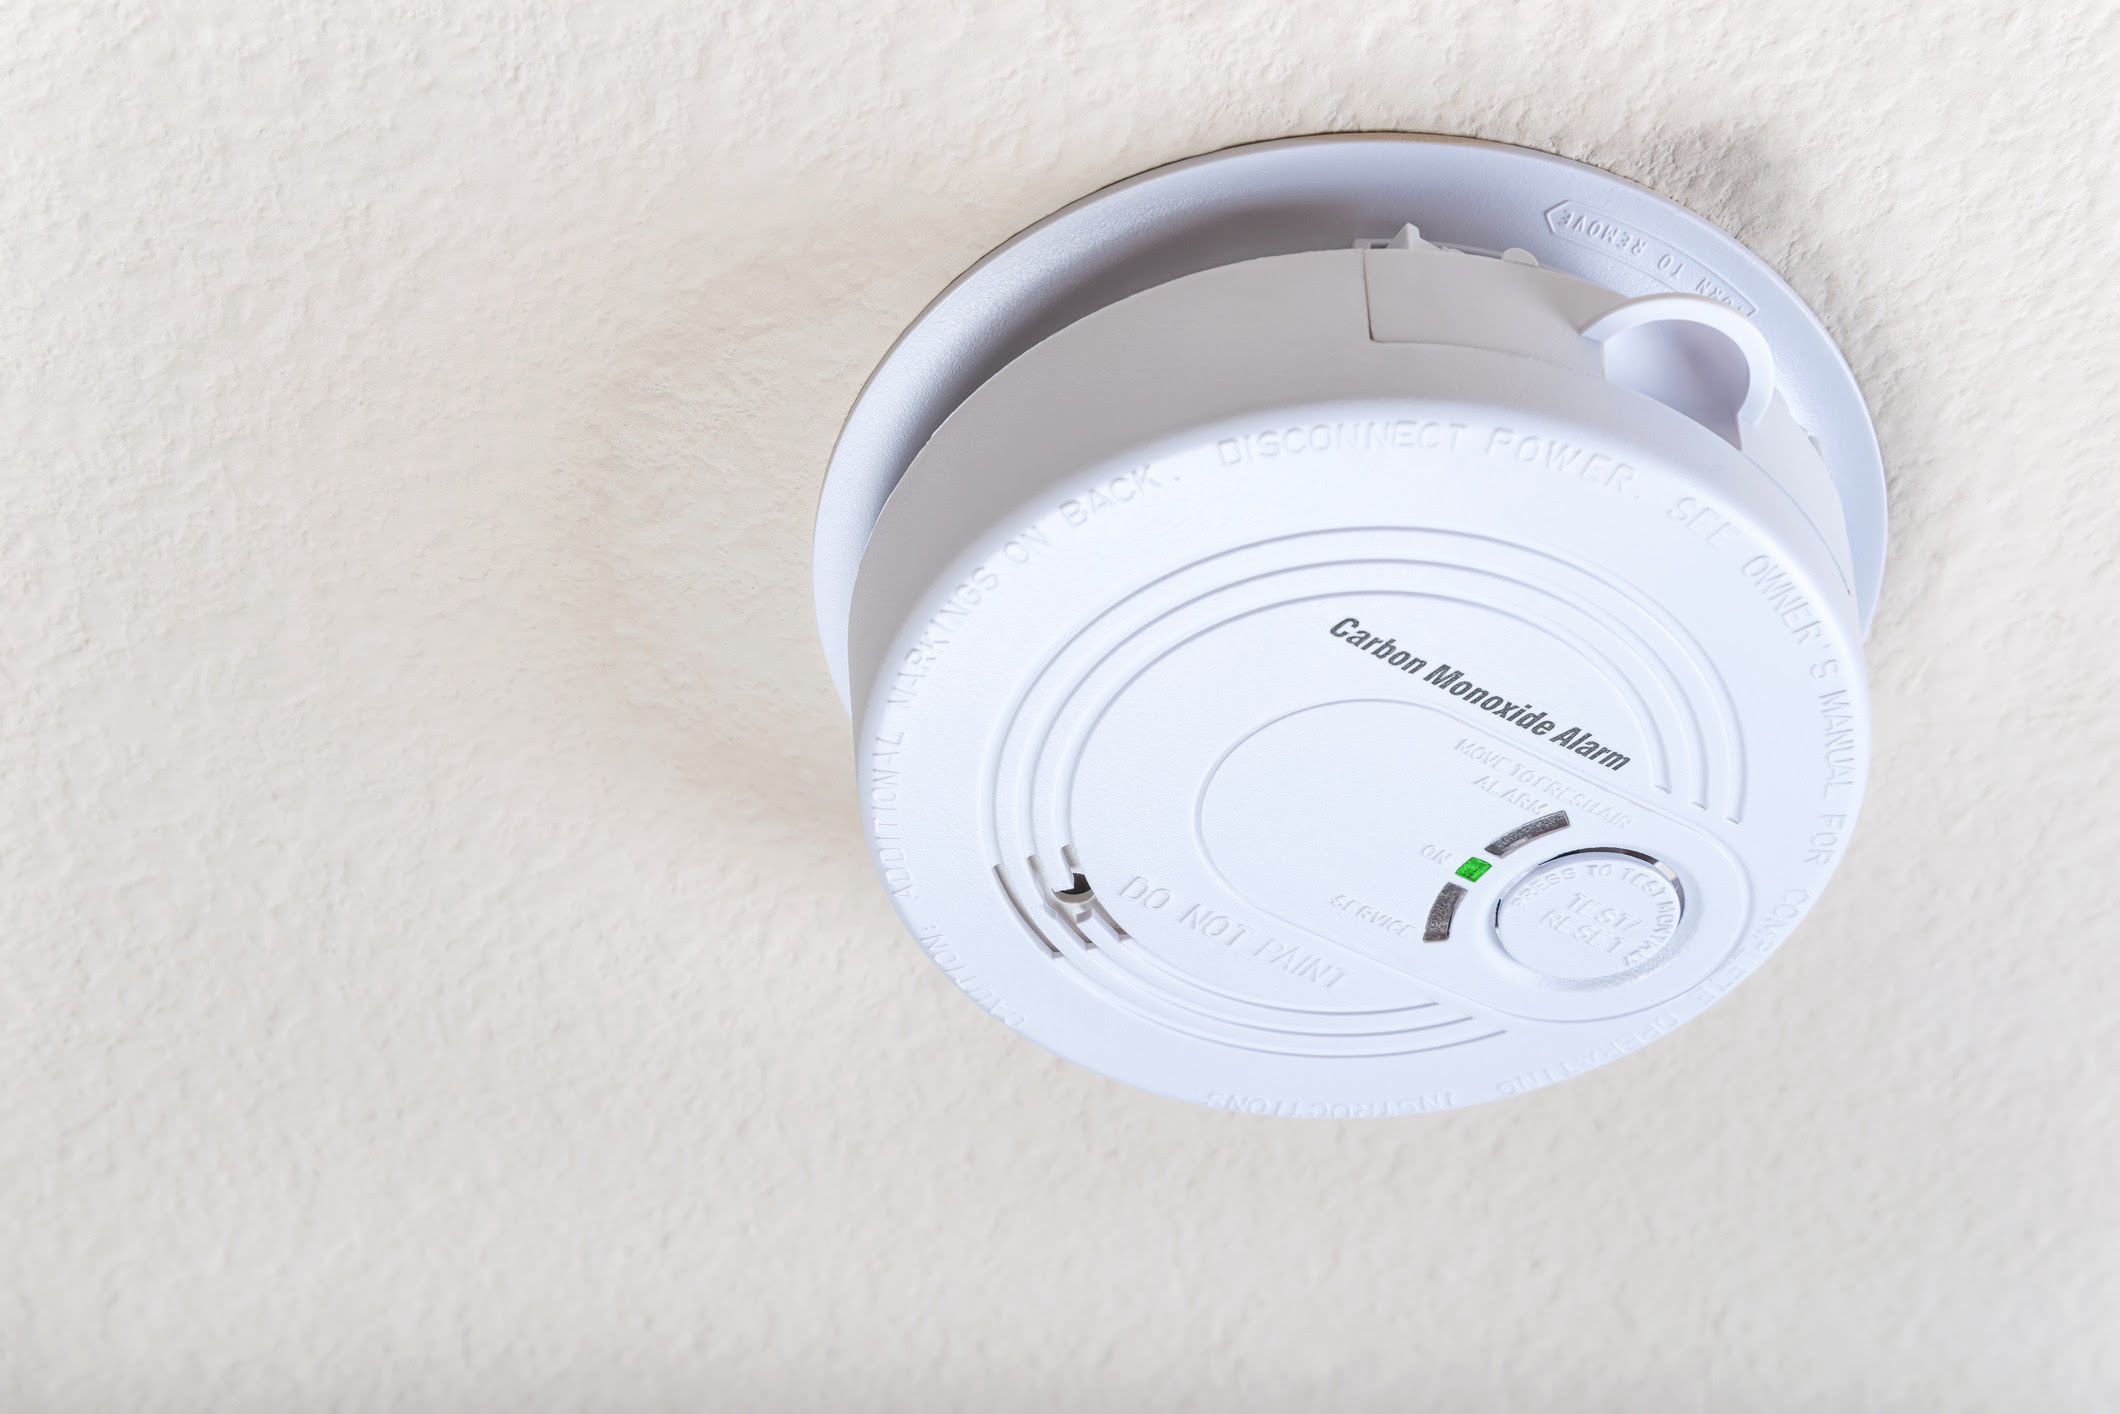 How To Know If A Carbon Monoxide Detector Is Working